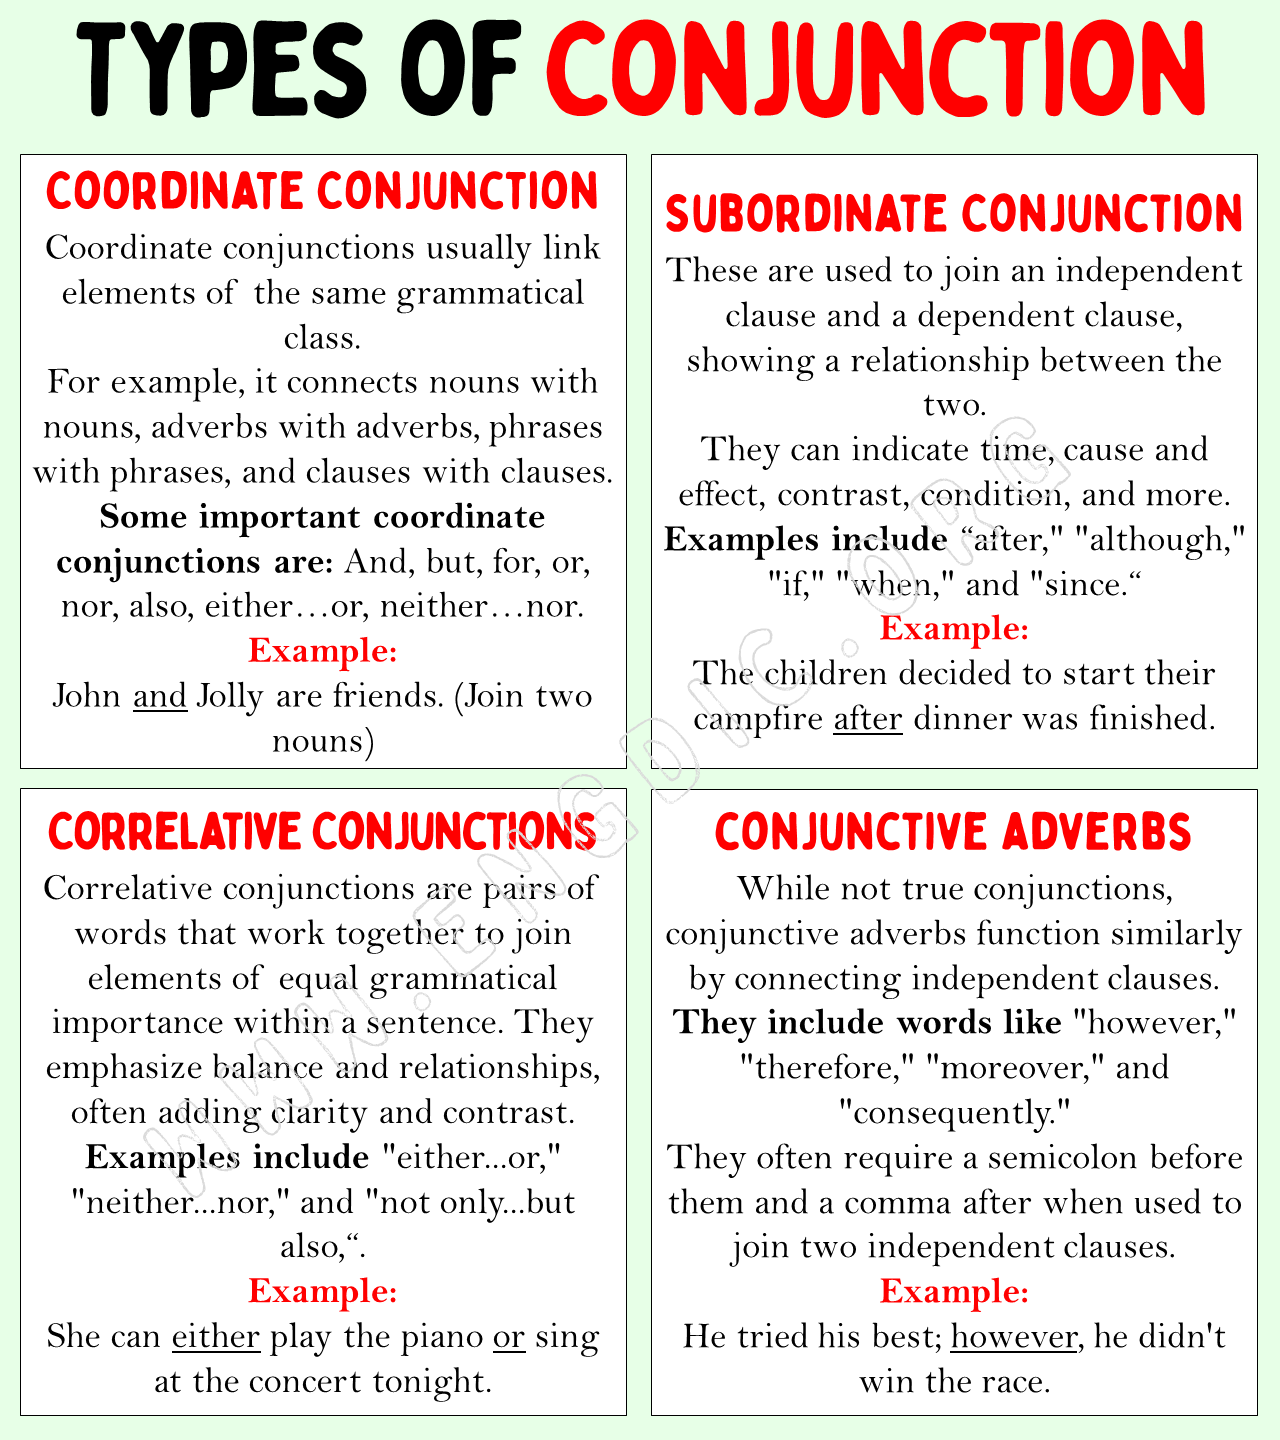 Types of Conjunction